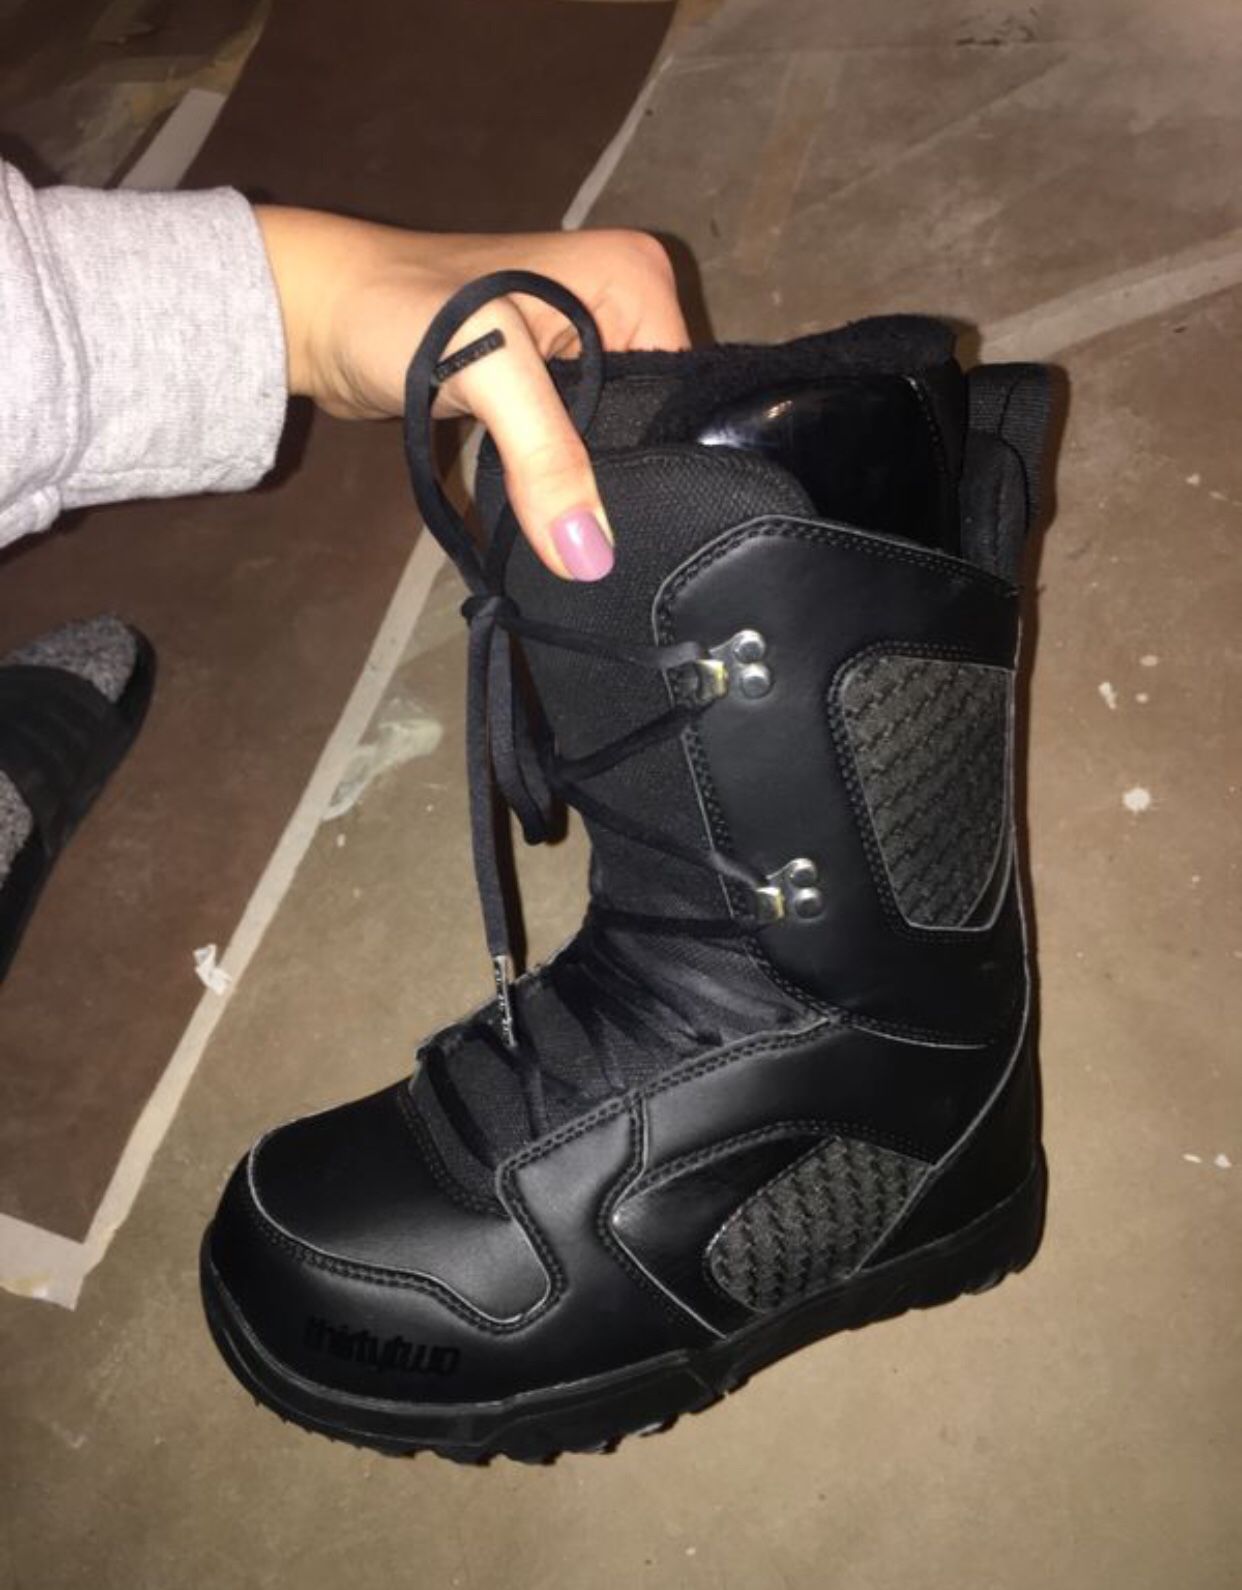 ThirtyTwo snowboard boots